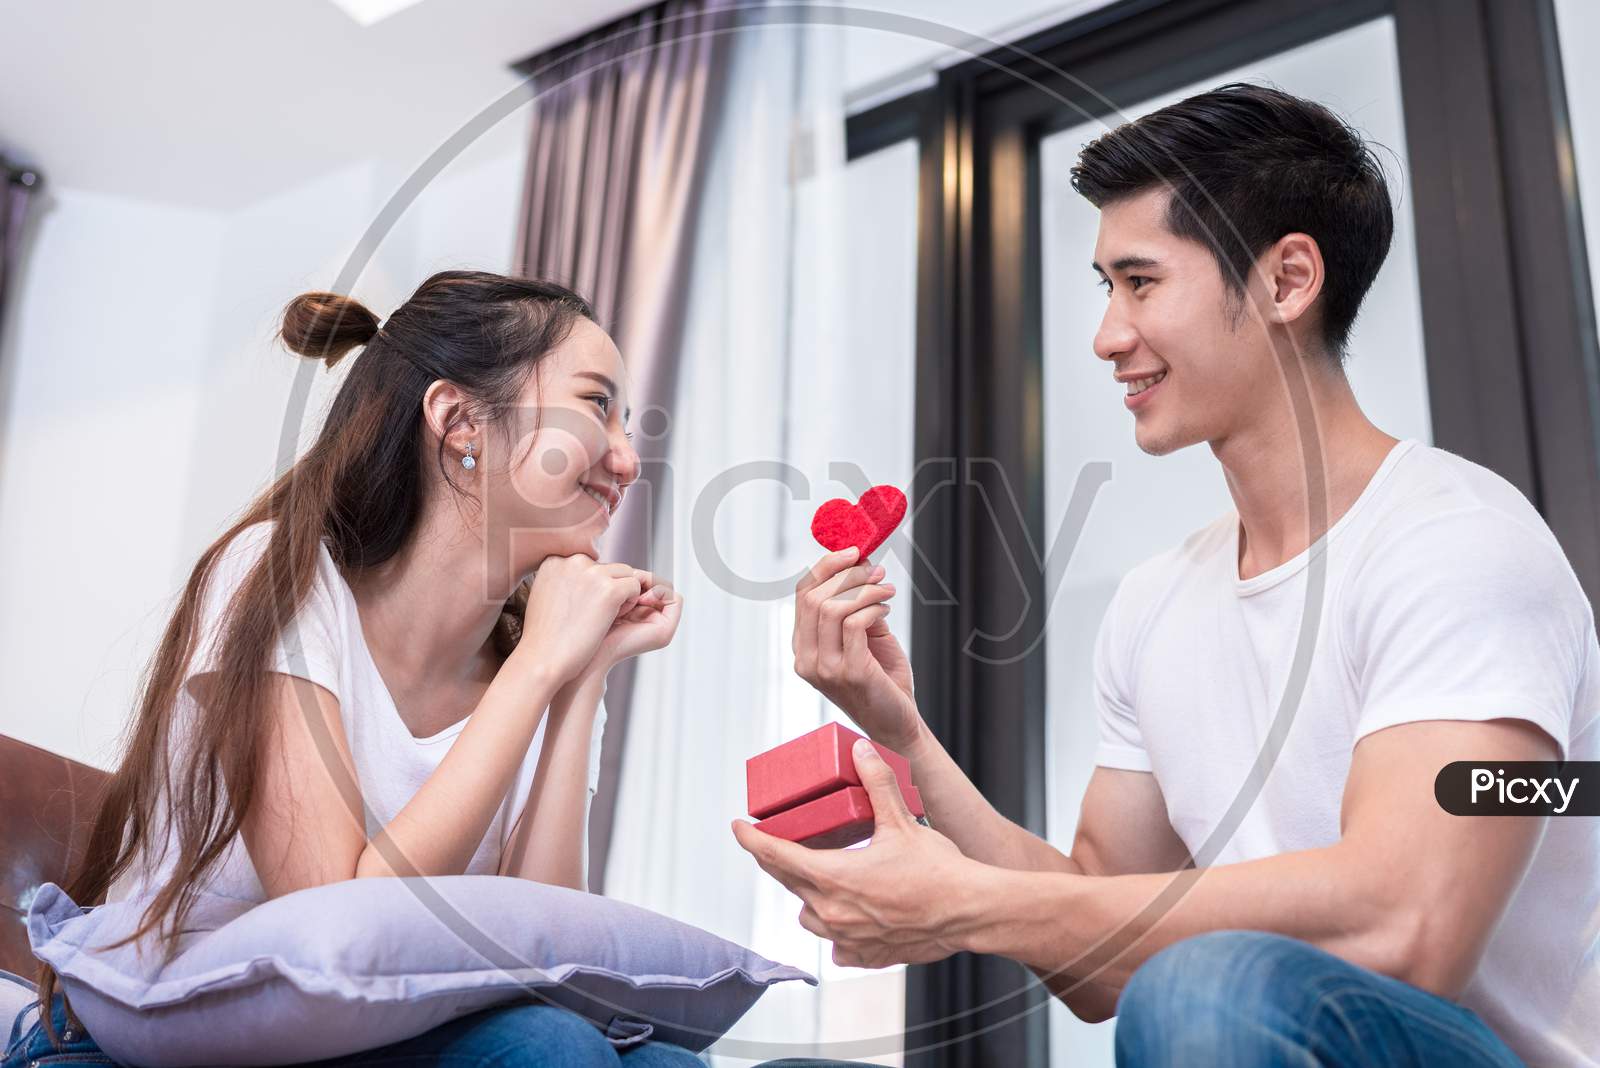 Man Holding Love Heart Symbol For Surprise Girlfriend At Their Home. Woman Waiting For Valentines Gift Form Boyfriend. Happy Birthday Party Anniversary Concept. People Couple Lifestyles And Family Life Theme